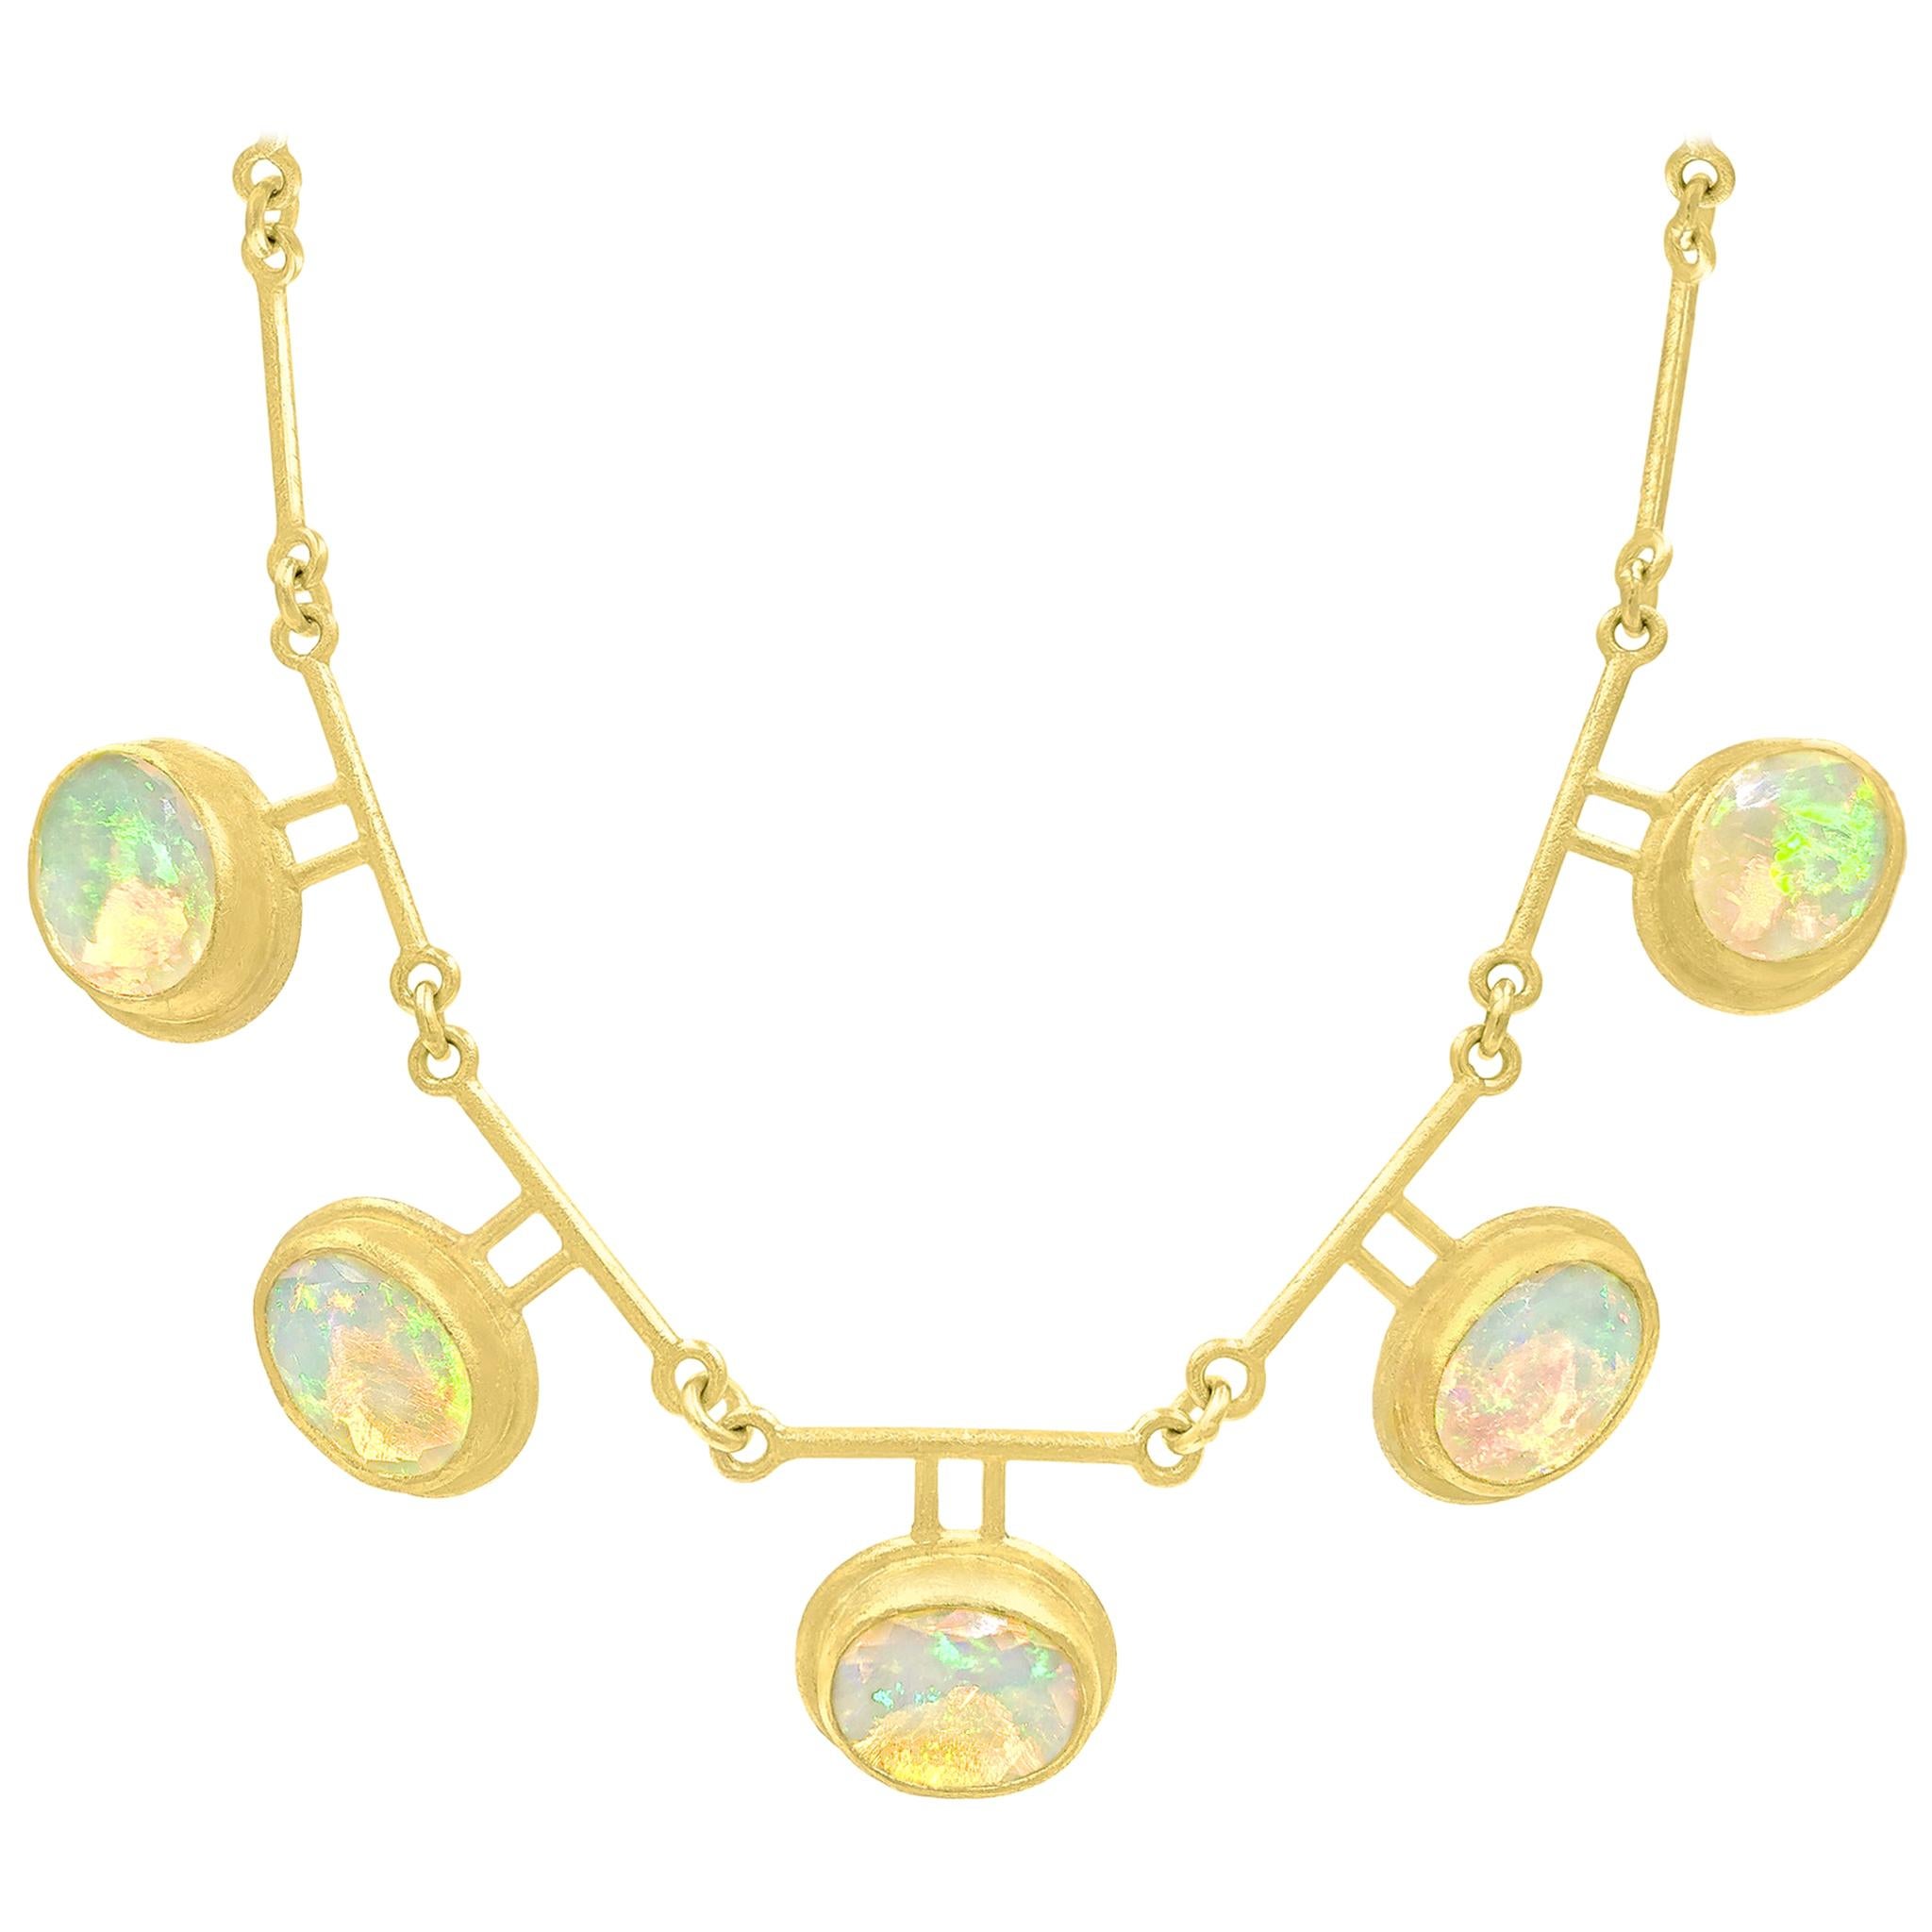 Petra Class Fiery Faceted Ethiopian Opal One-of-a-Kind Double Segment Necklace